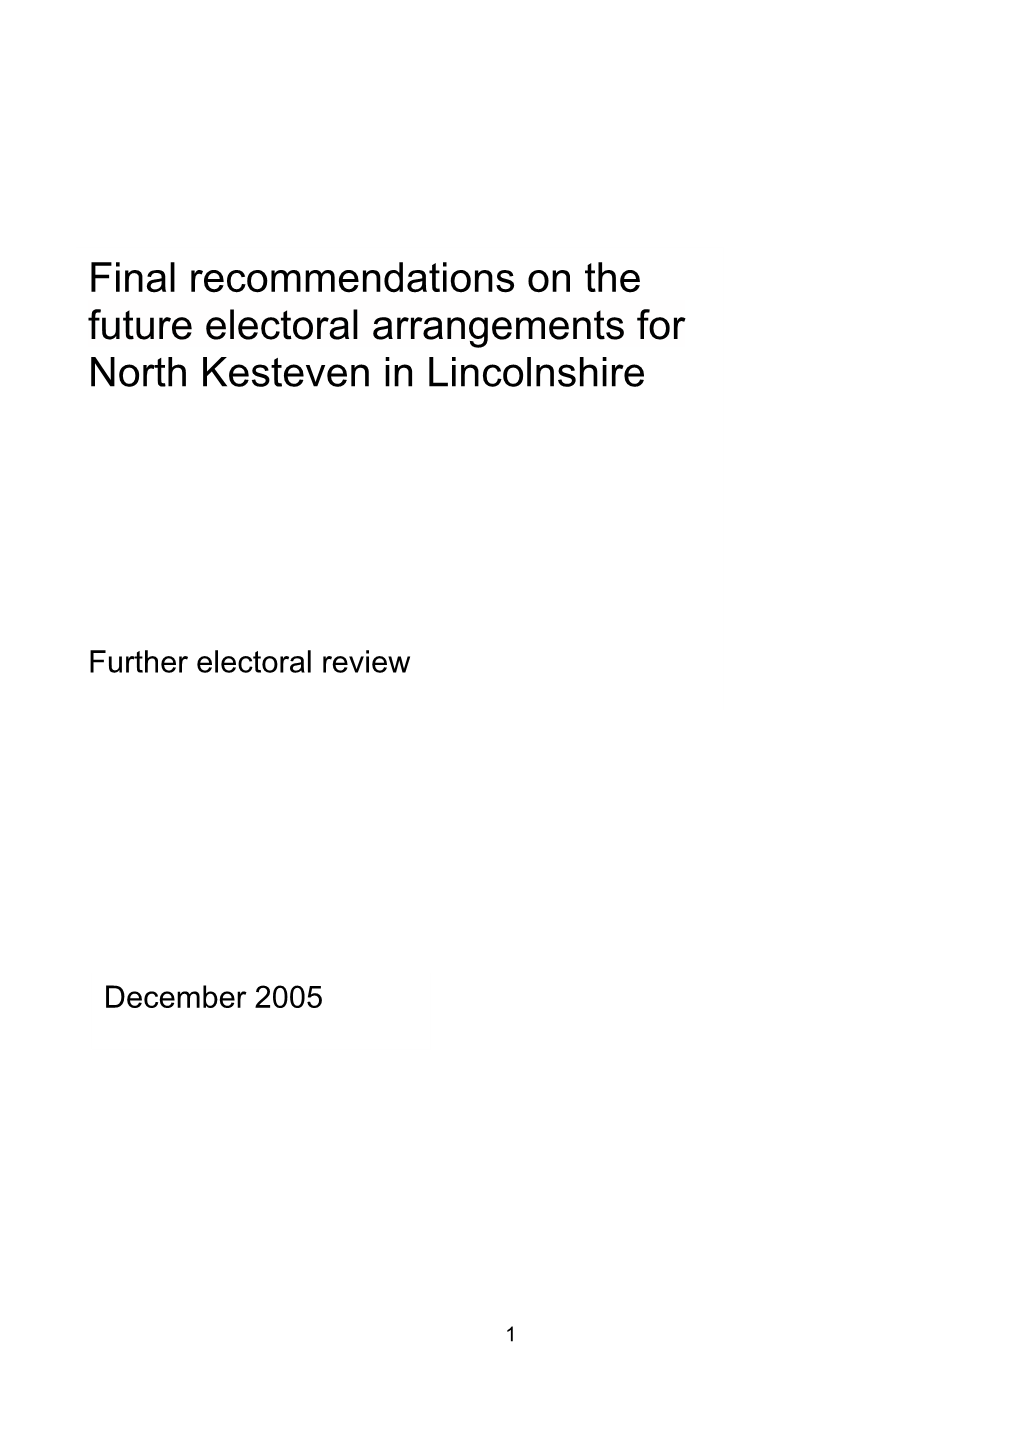 Final Recommendations on the Future Electoral Arrangements for North Kesteven in Lincolnshire